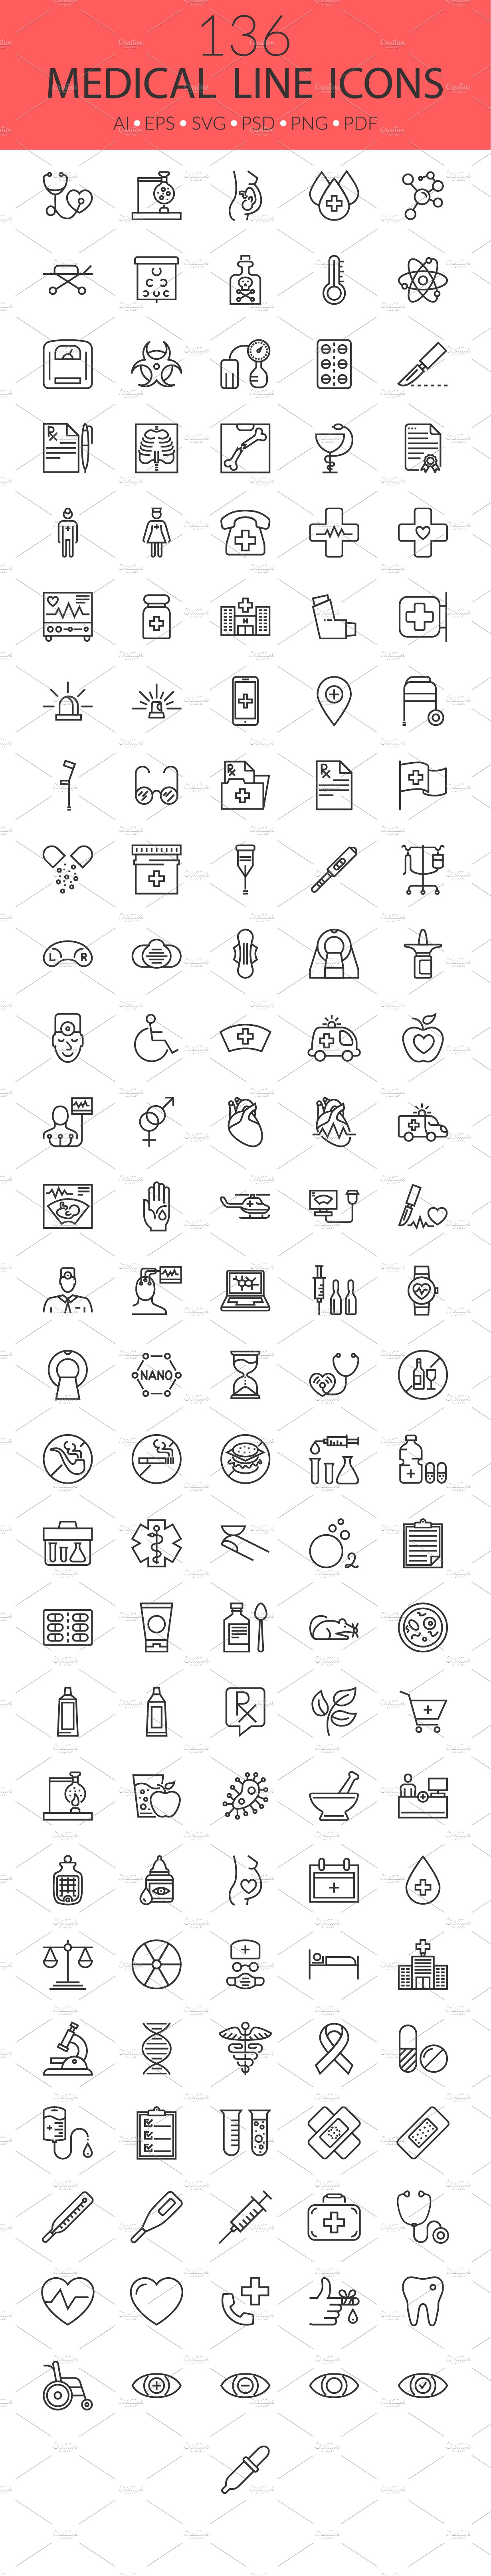 Medical Vector Icons Set. cover image.